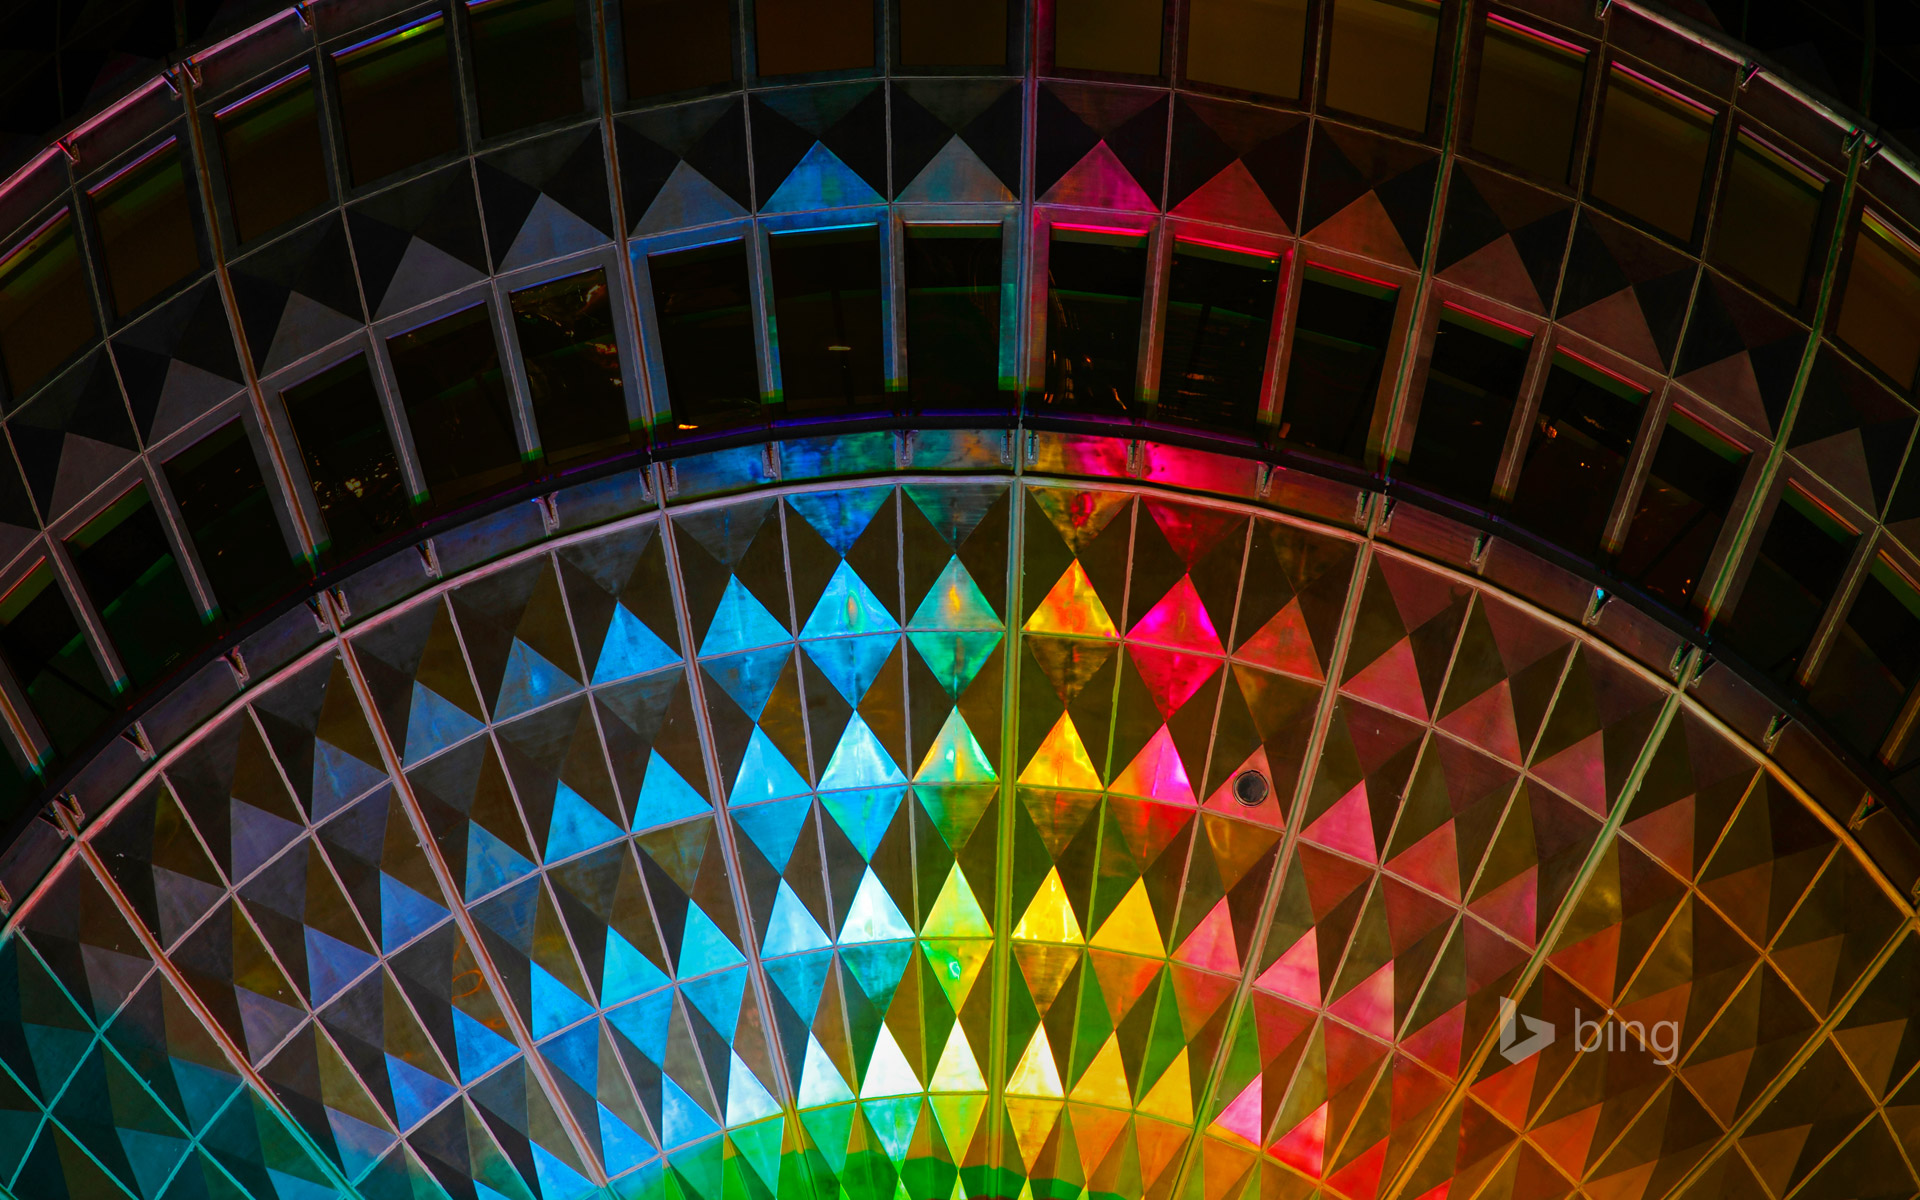 Detail of a television tower illuminated during the Festival of Lights in 2011, Berlin, Germany